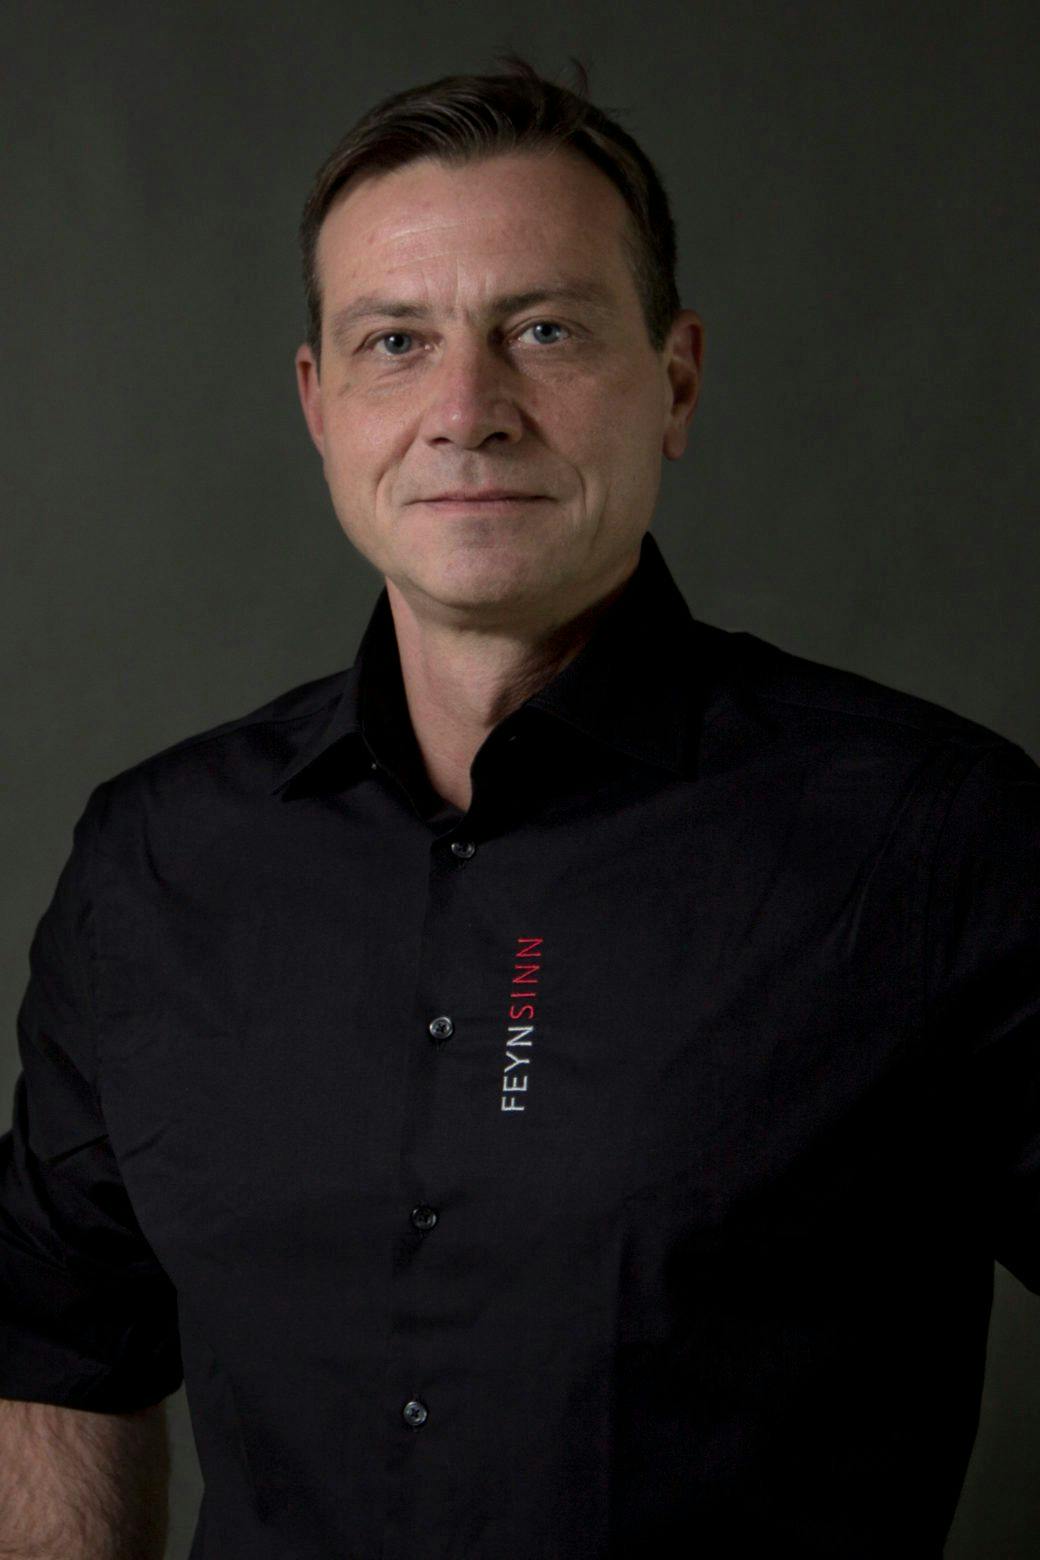 A picture of the author, Jens Weiler